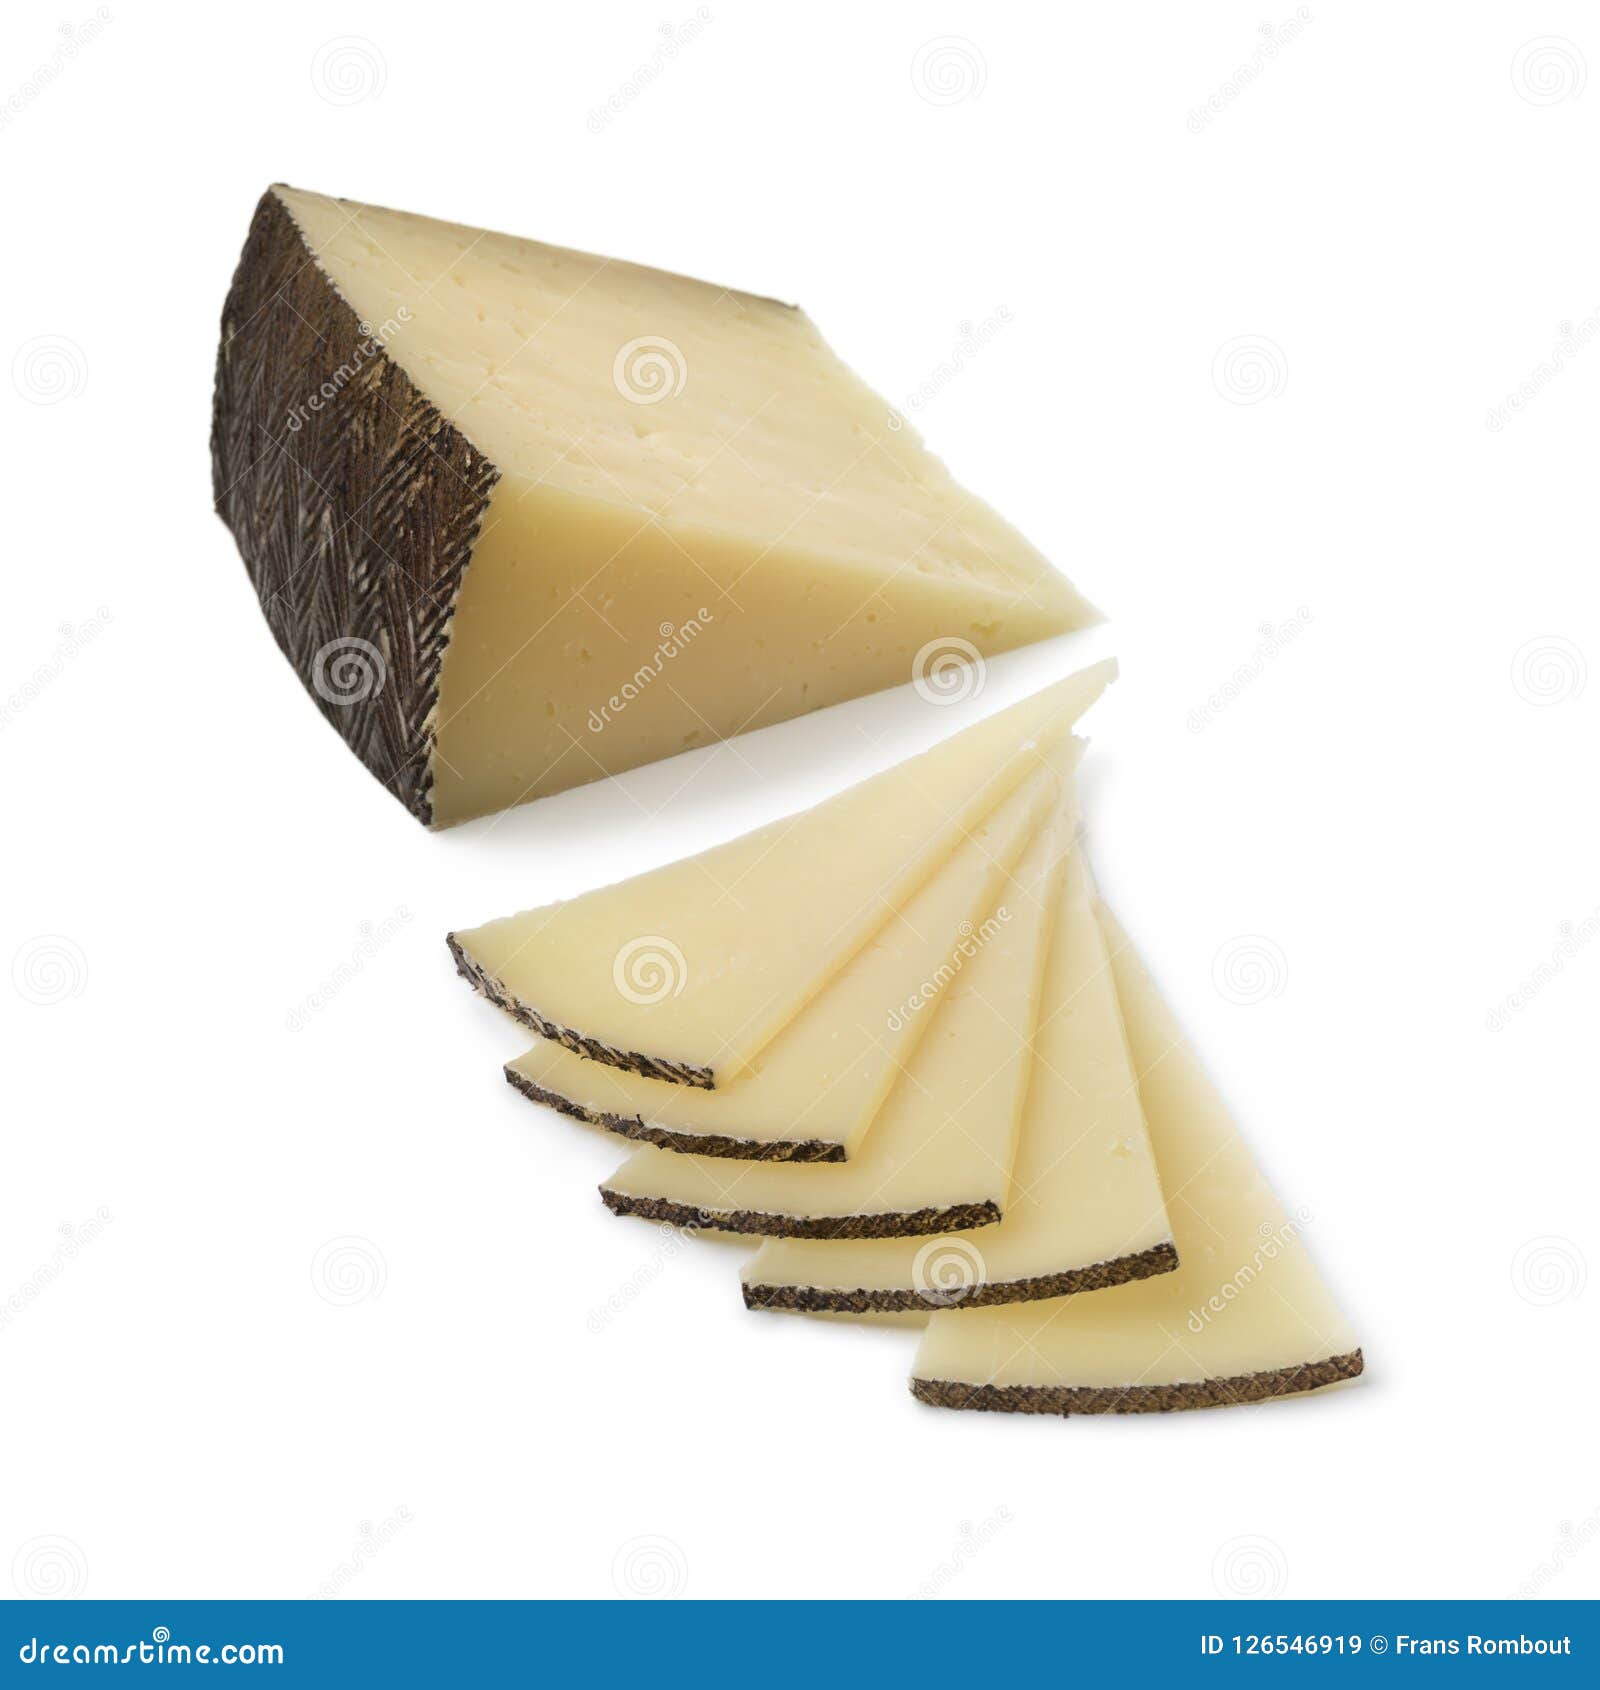 slices of spanish manchego cheese